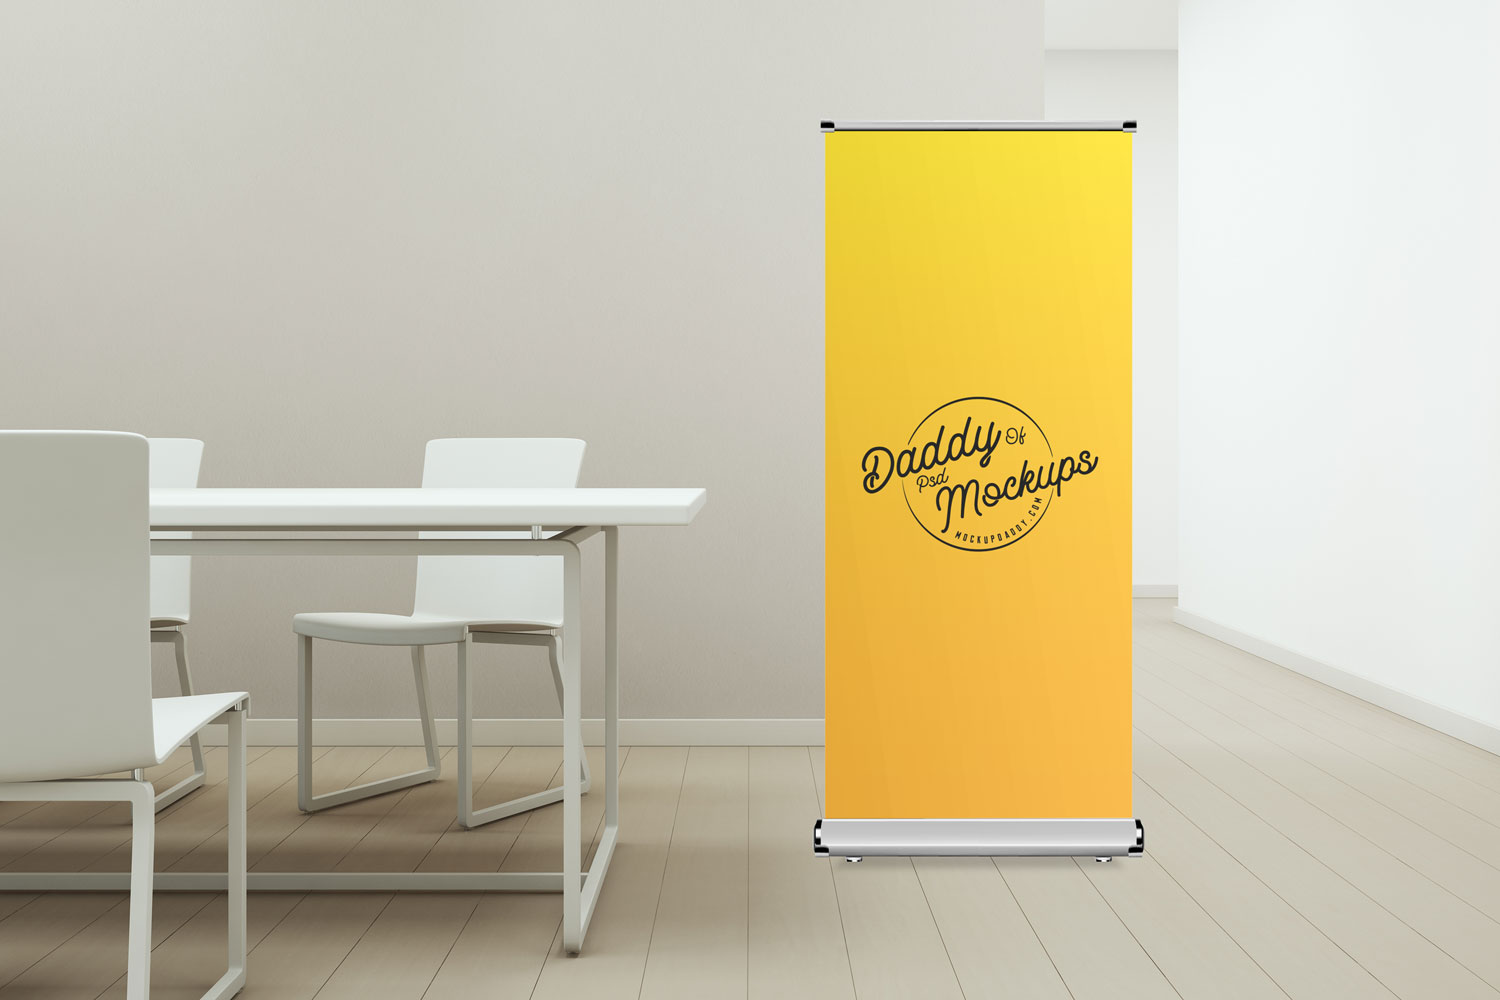 Digital roll-up banner mockup in an office conference room